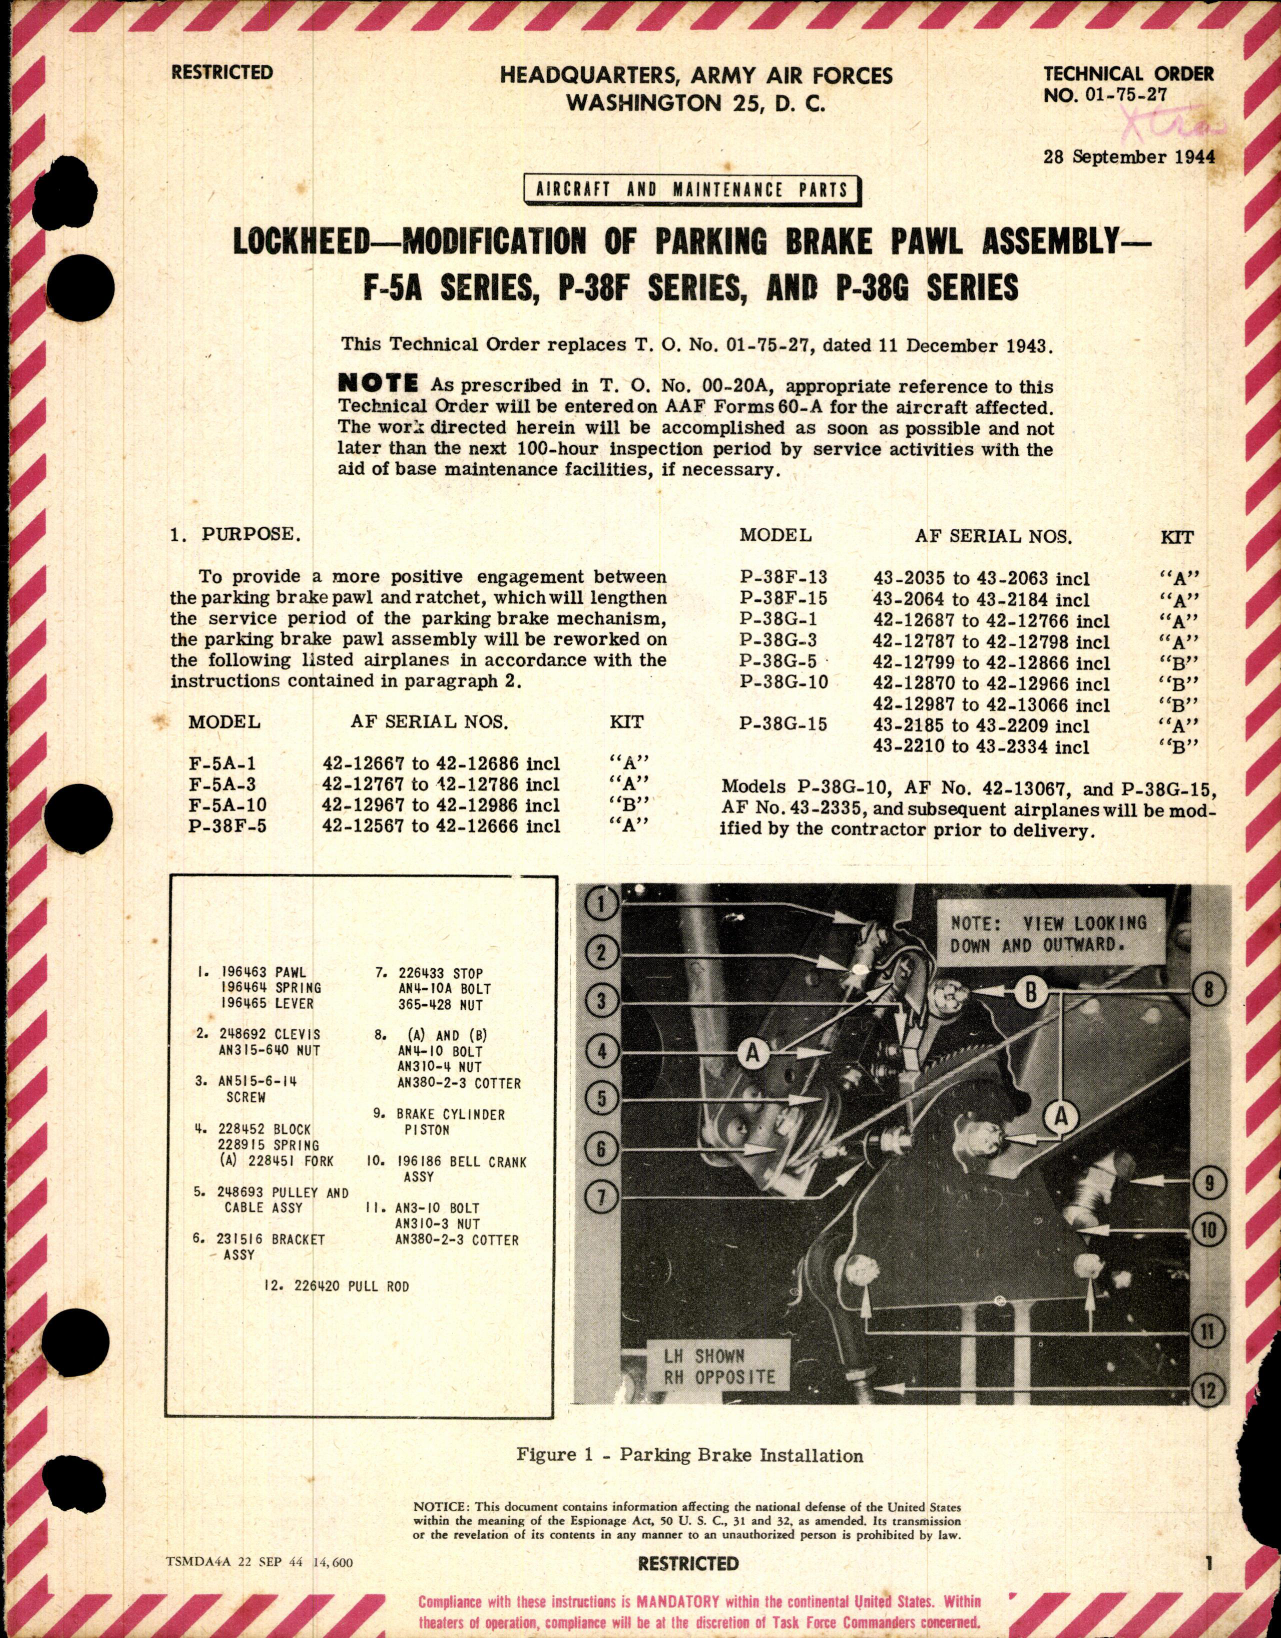 Sample page 1 from AirCorps Library document: Modification of Parking Brake Pawl Assembly for F-5A, P-38F, and G Series